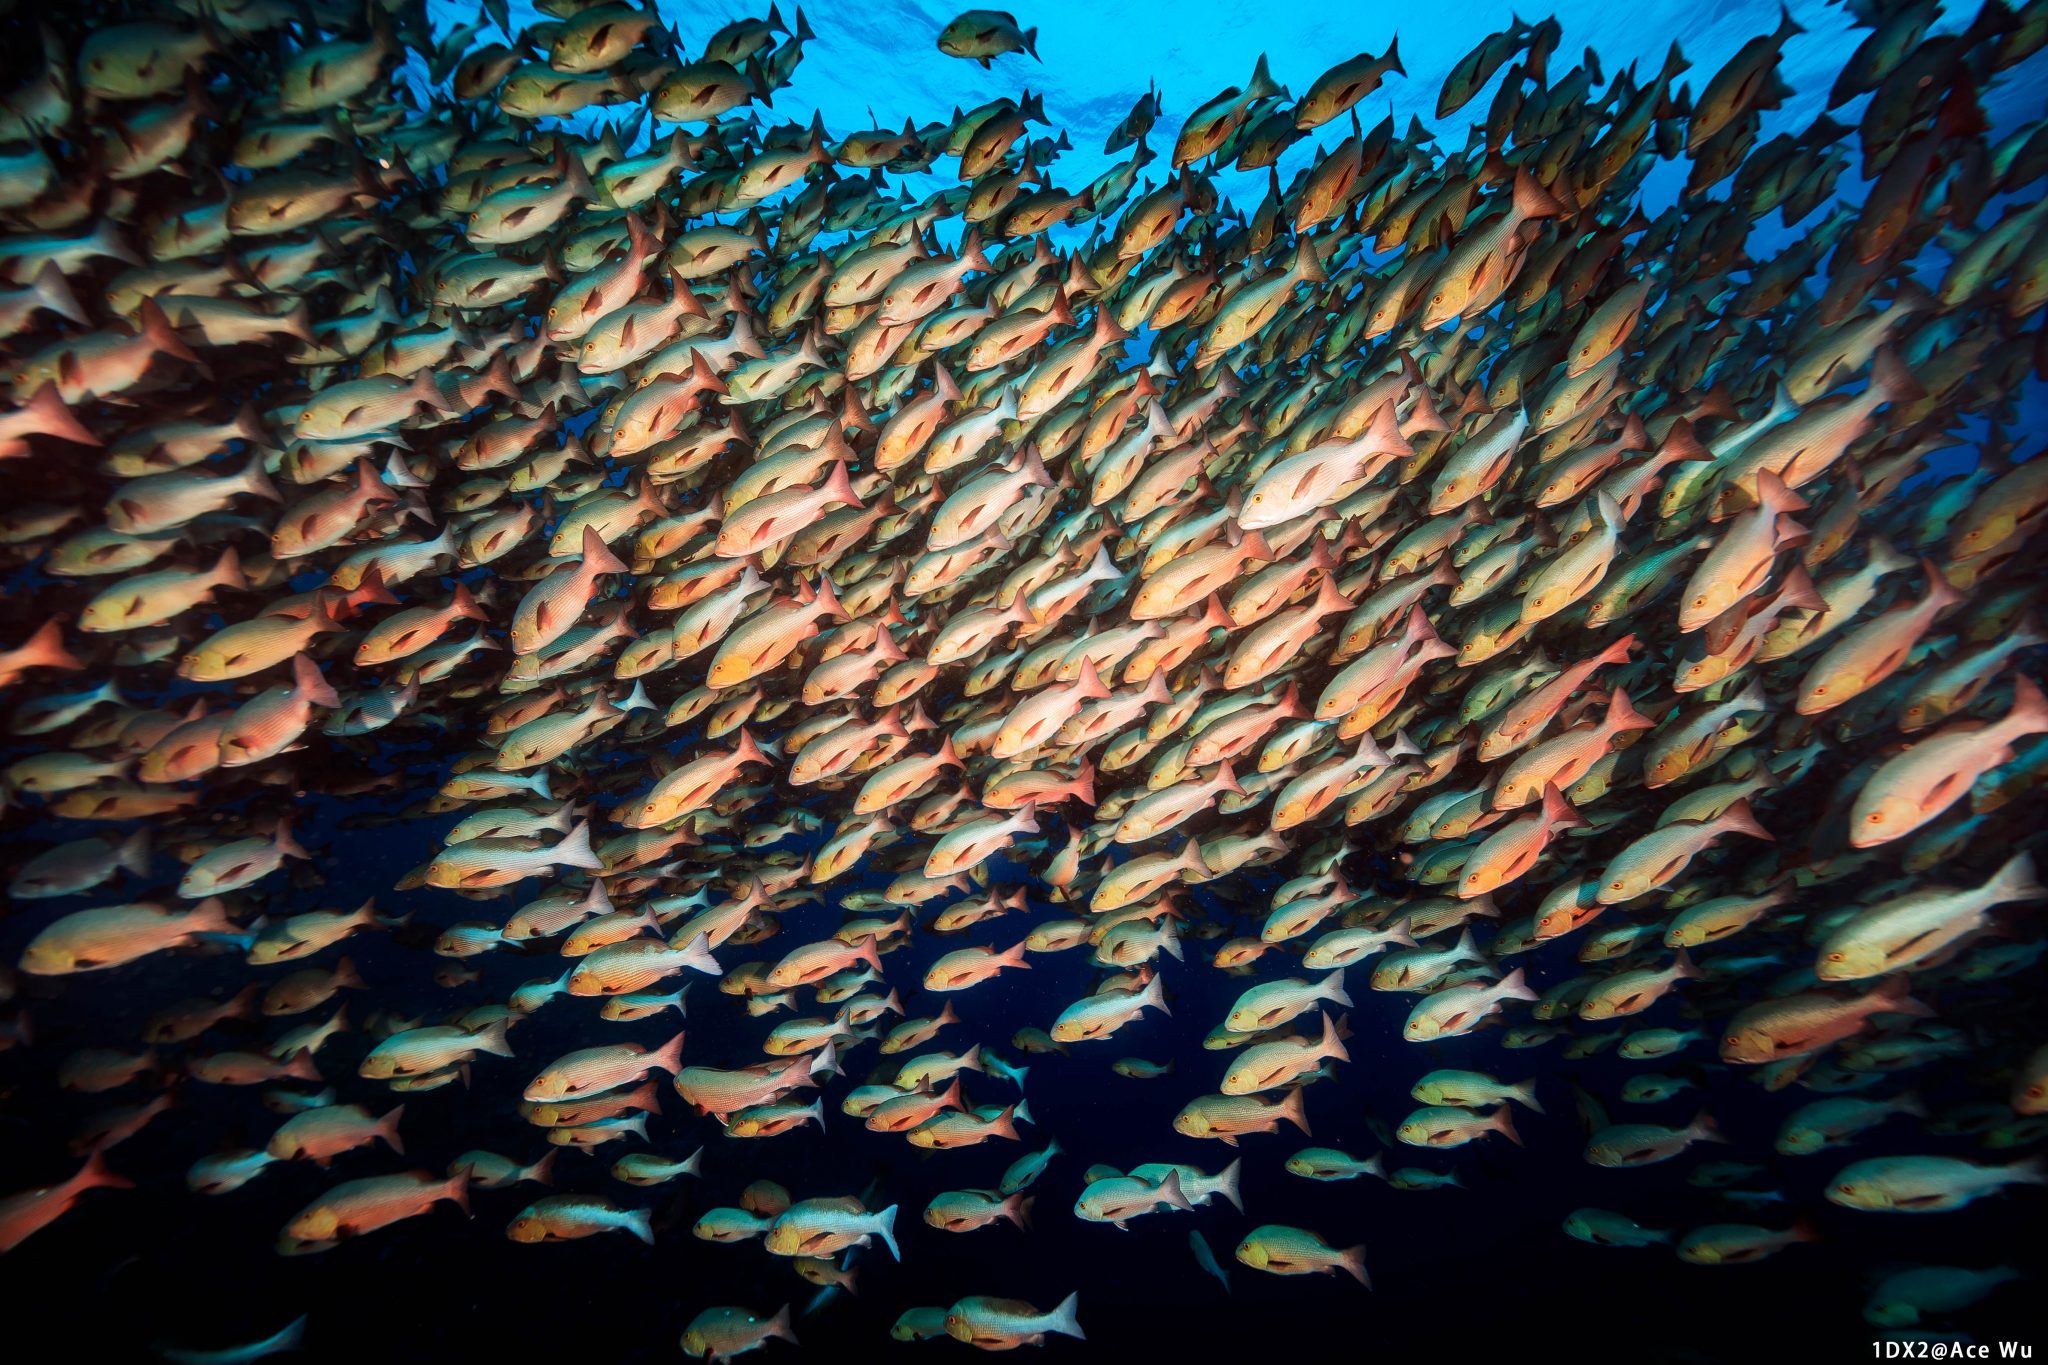 A school of fish in Palau's waters